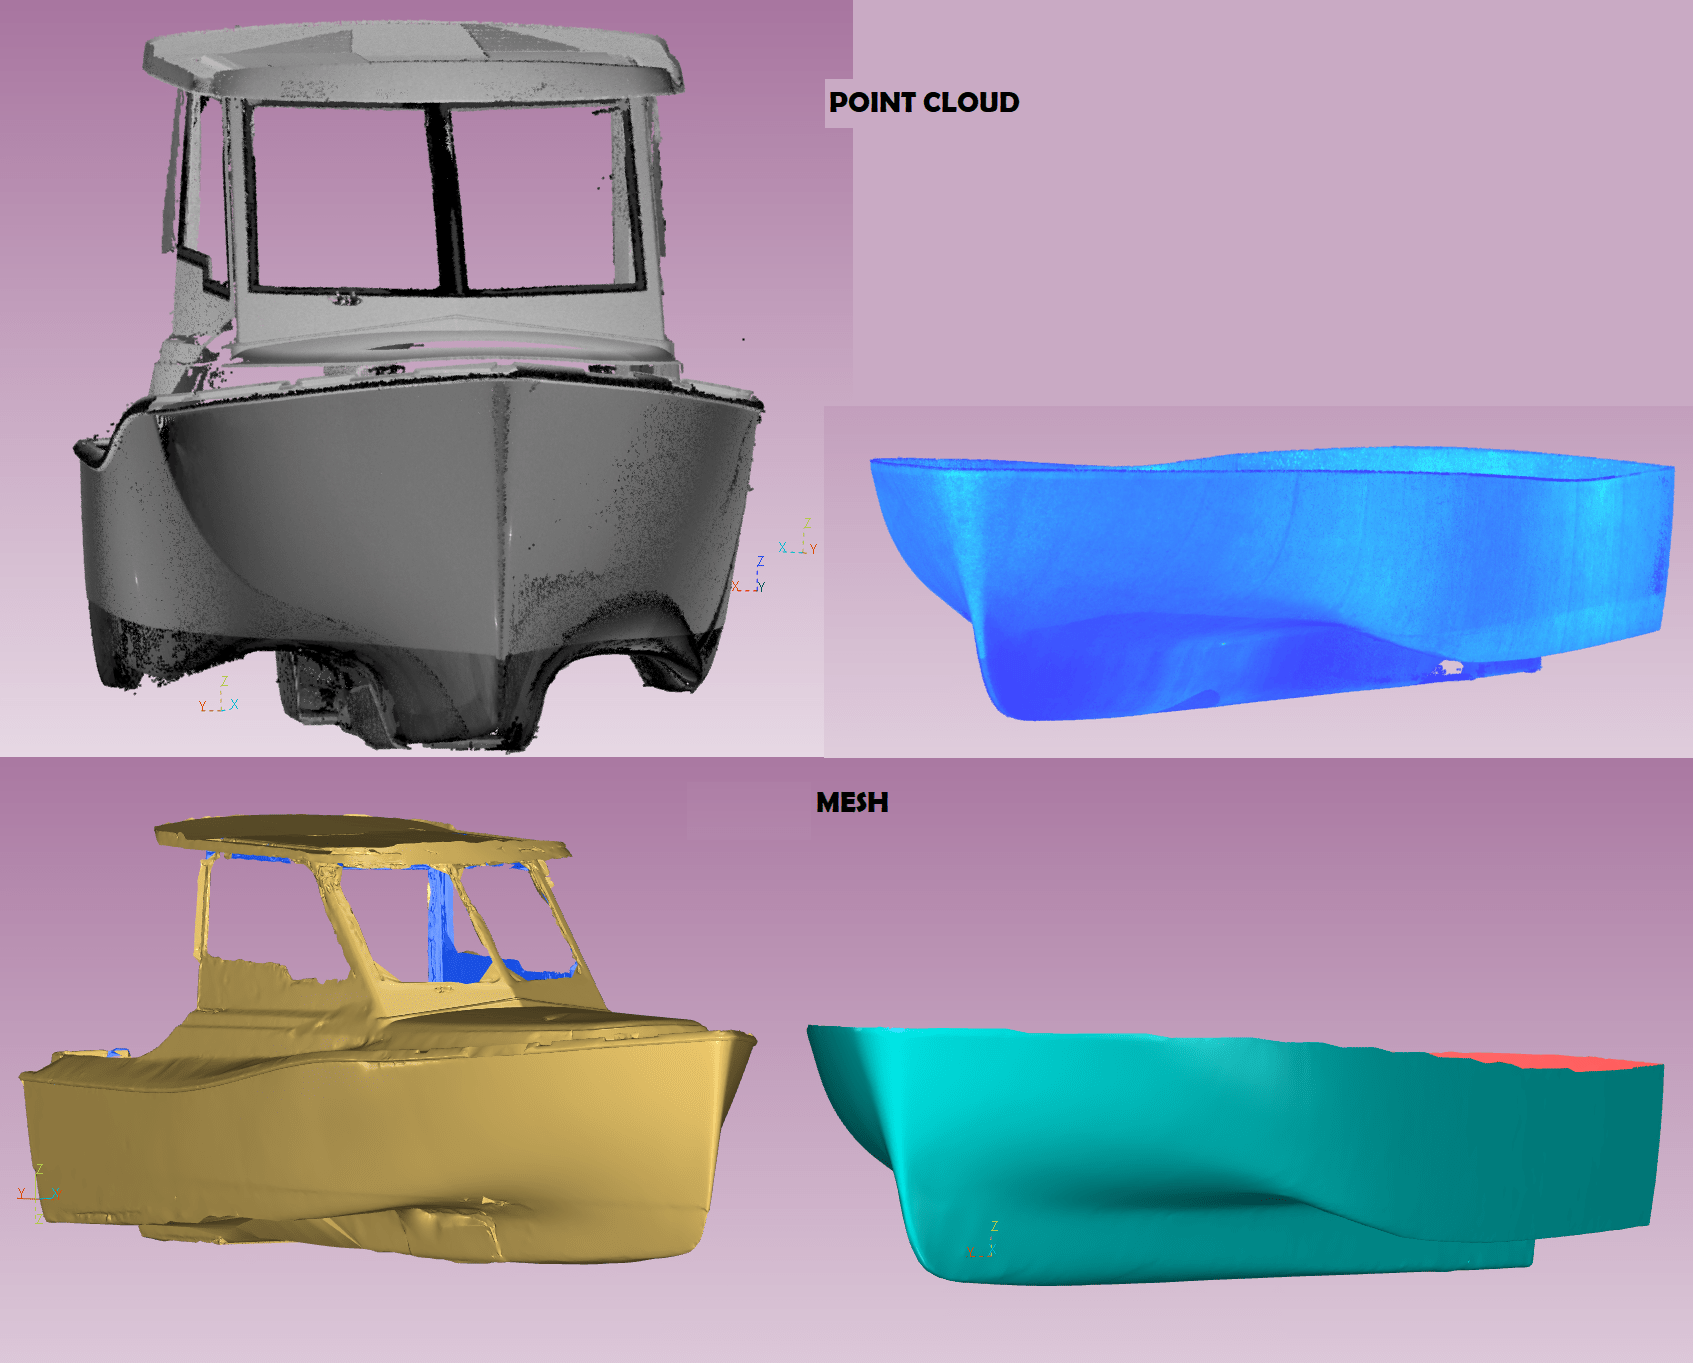 Motor boat point cloud and mesh images